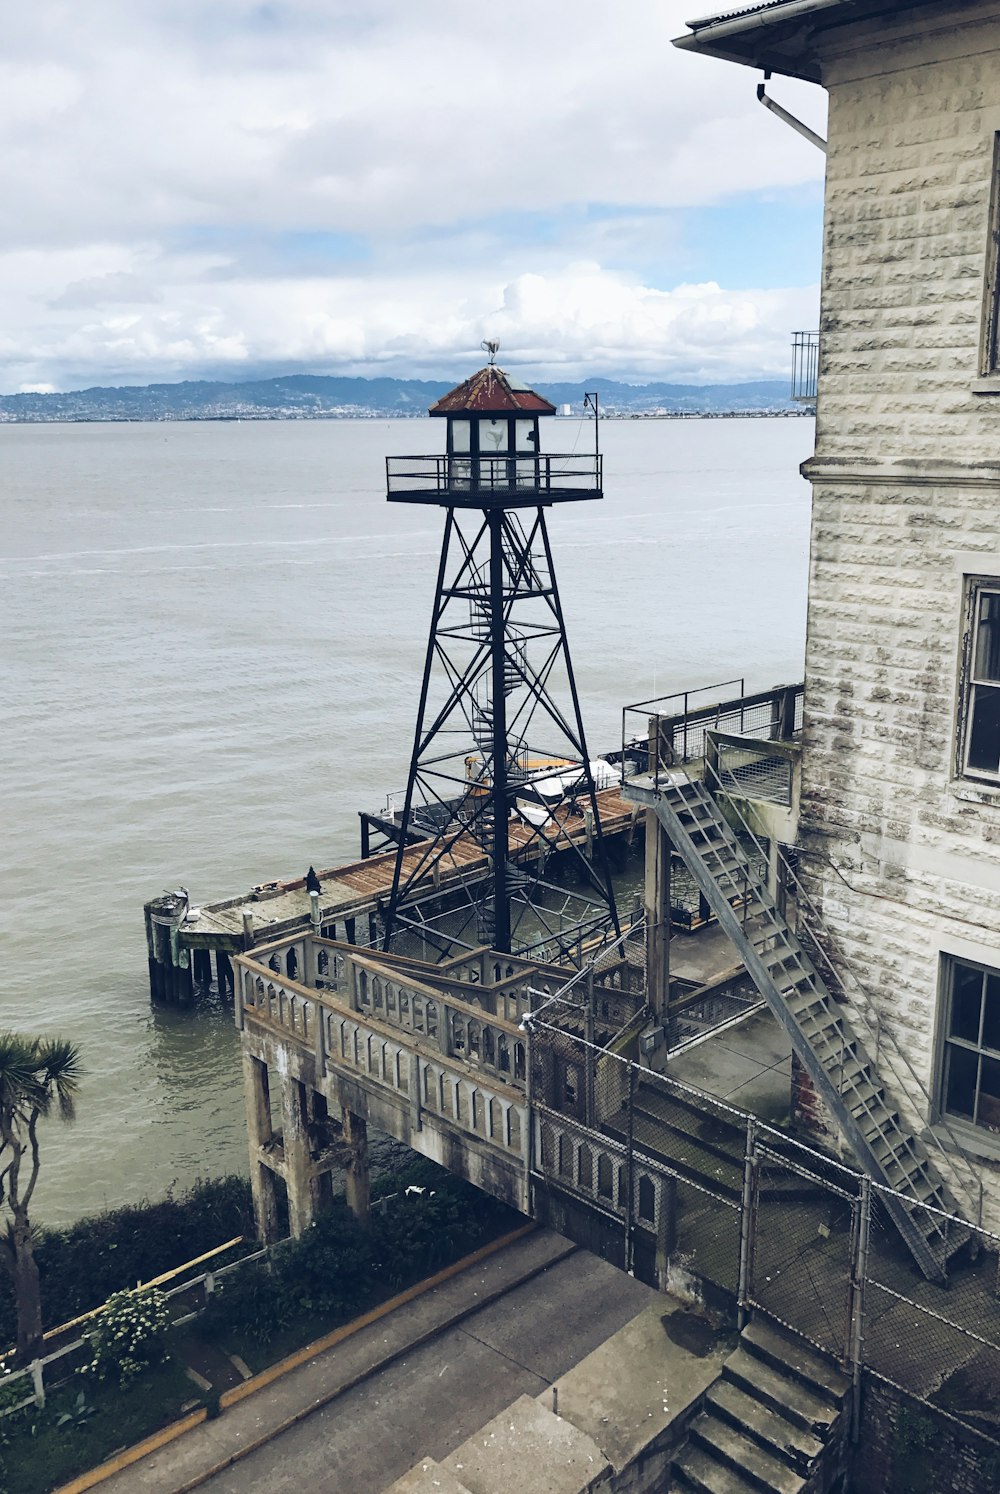 an old building with a tower next to a body of water